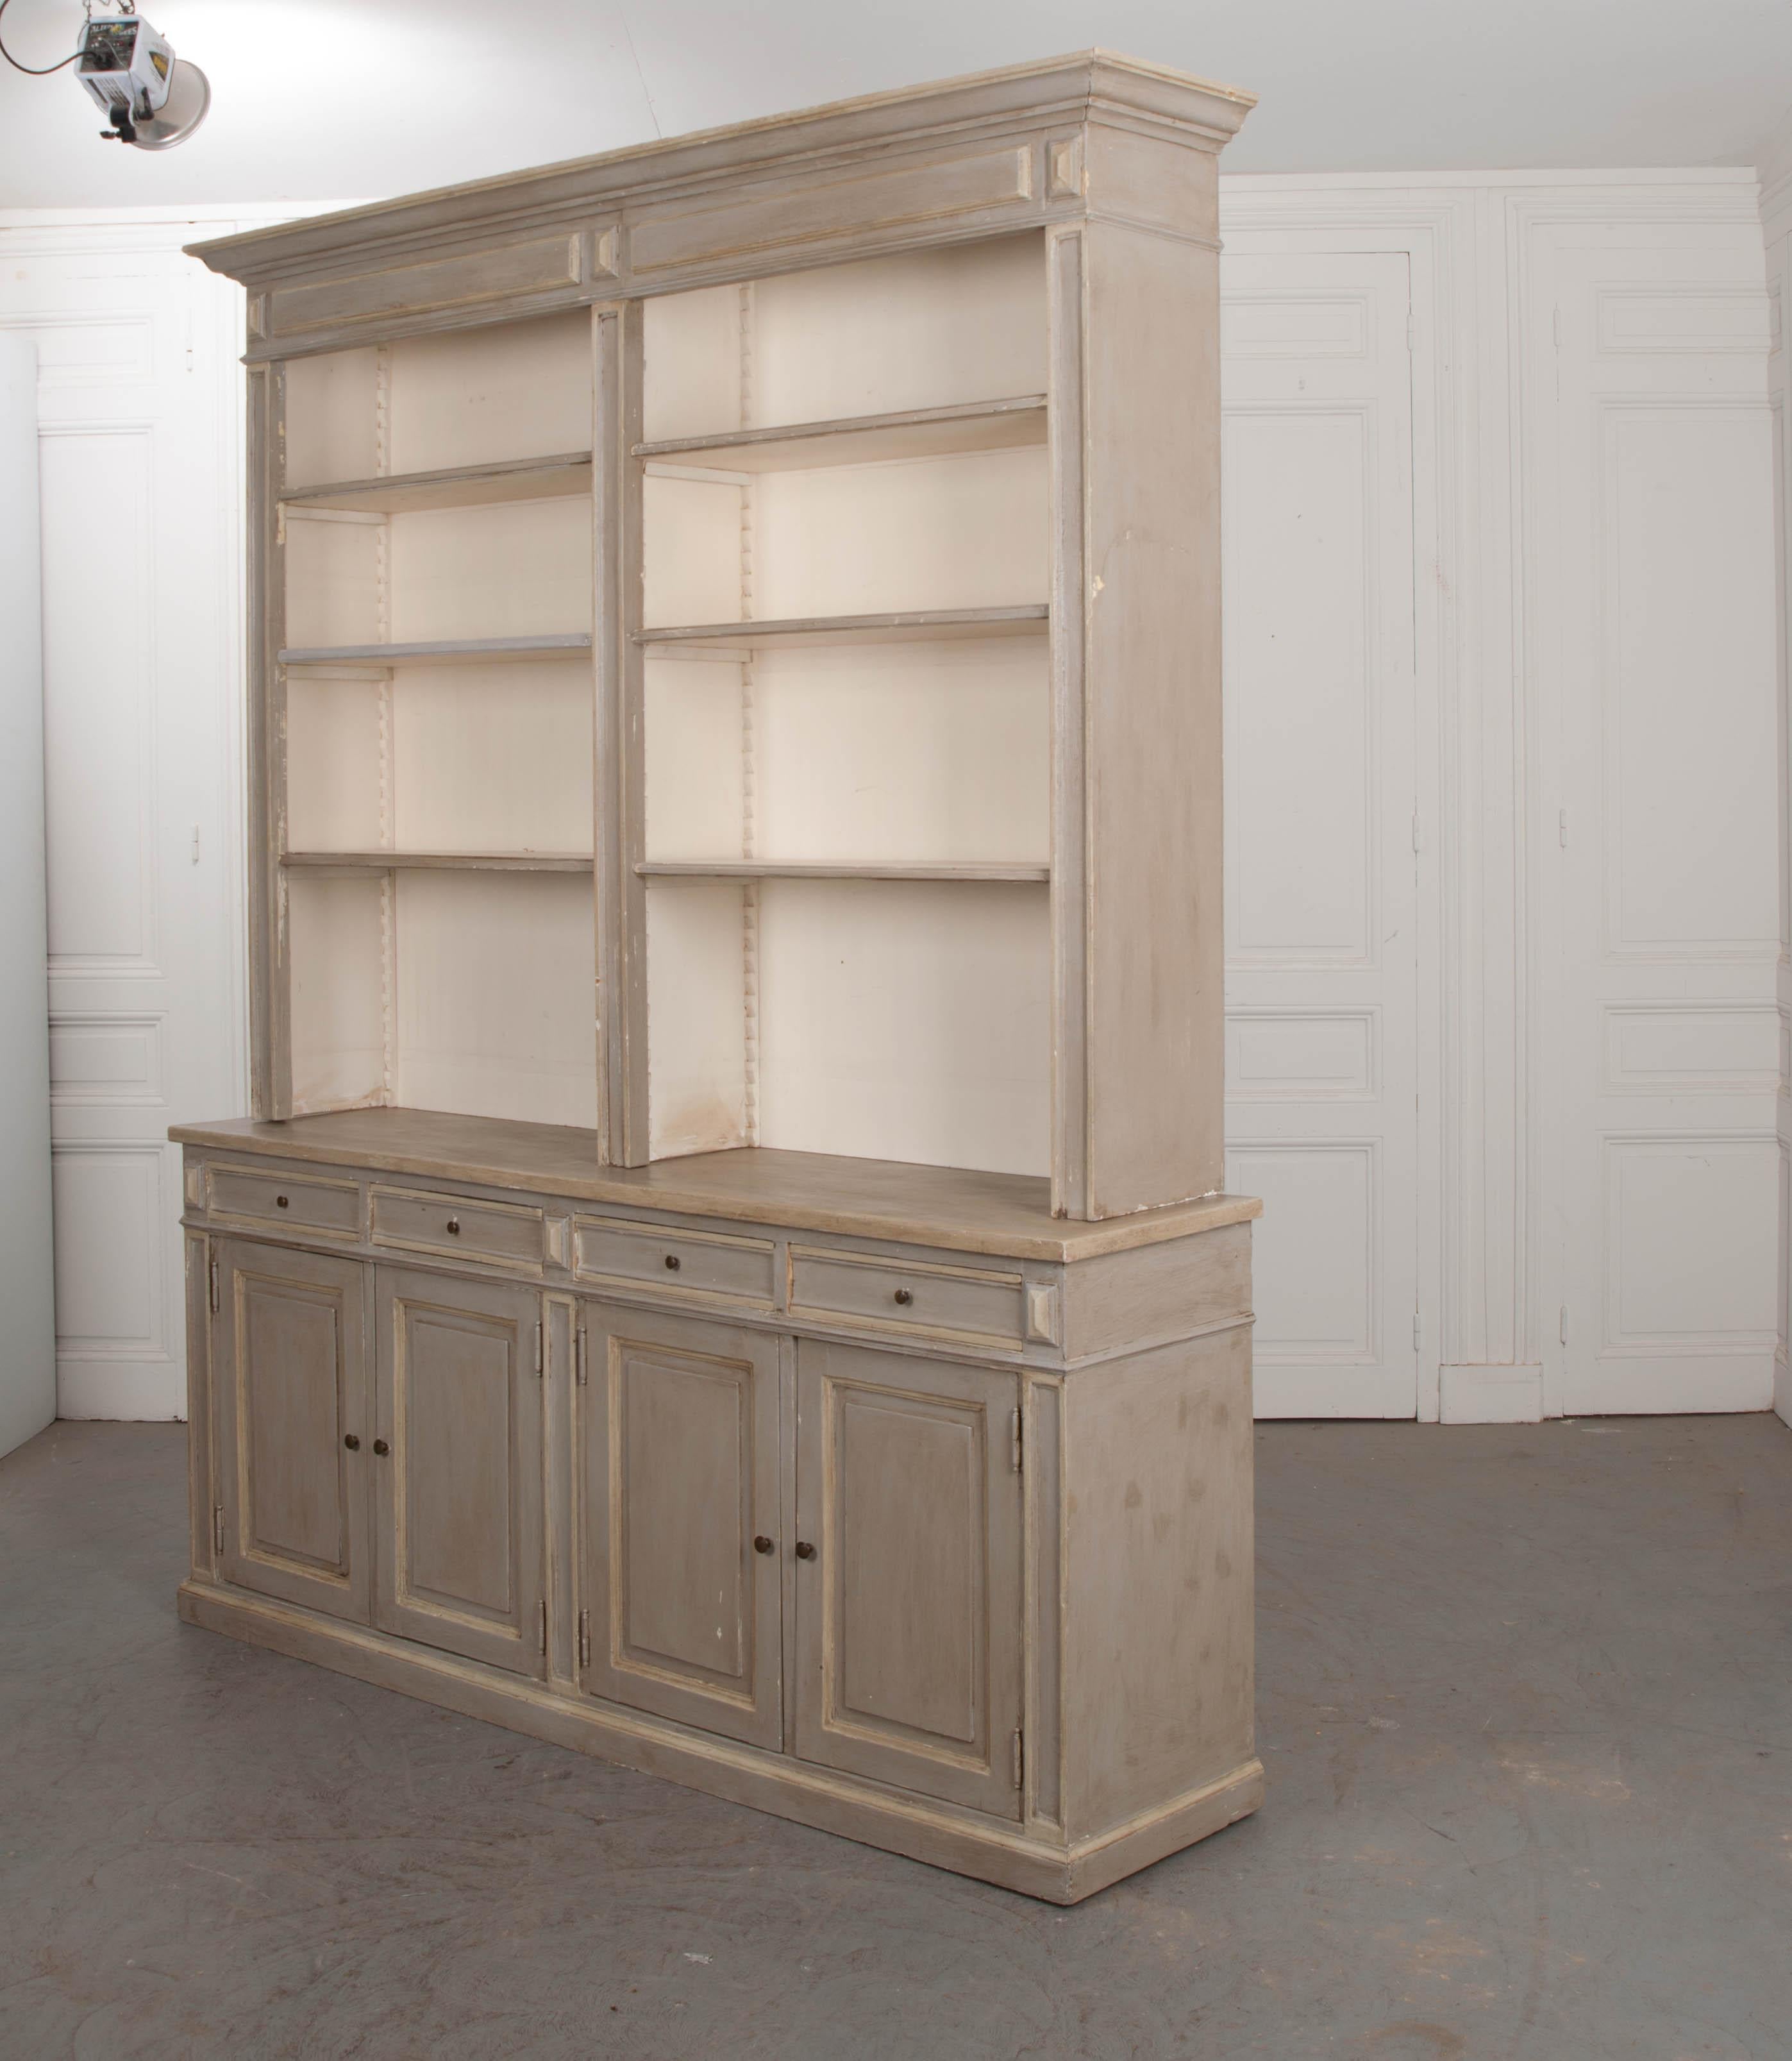 This beautiful reproduction Georgian-style bookcase is painted pale-grey with pale-green highlights and a cream interior including the drawers. The upper bookcase is divided into two parts and outfitted with three adjustable shelves resting on a